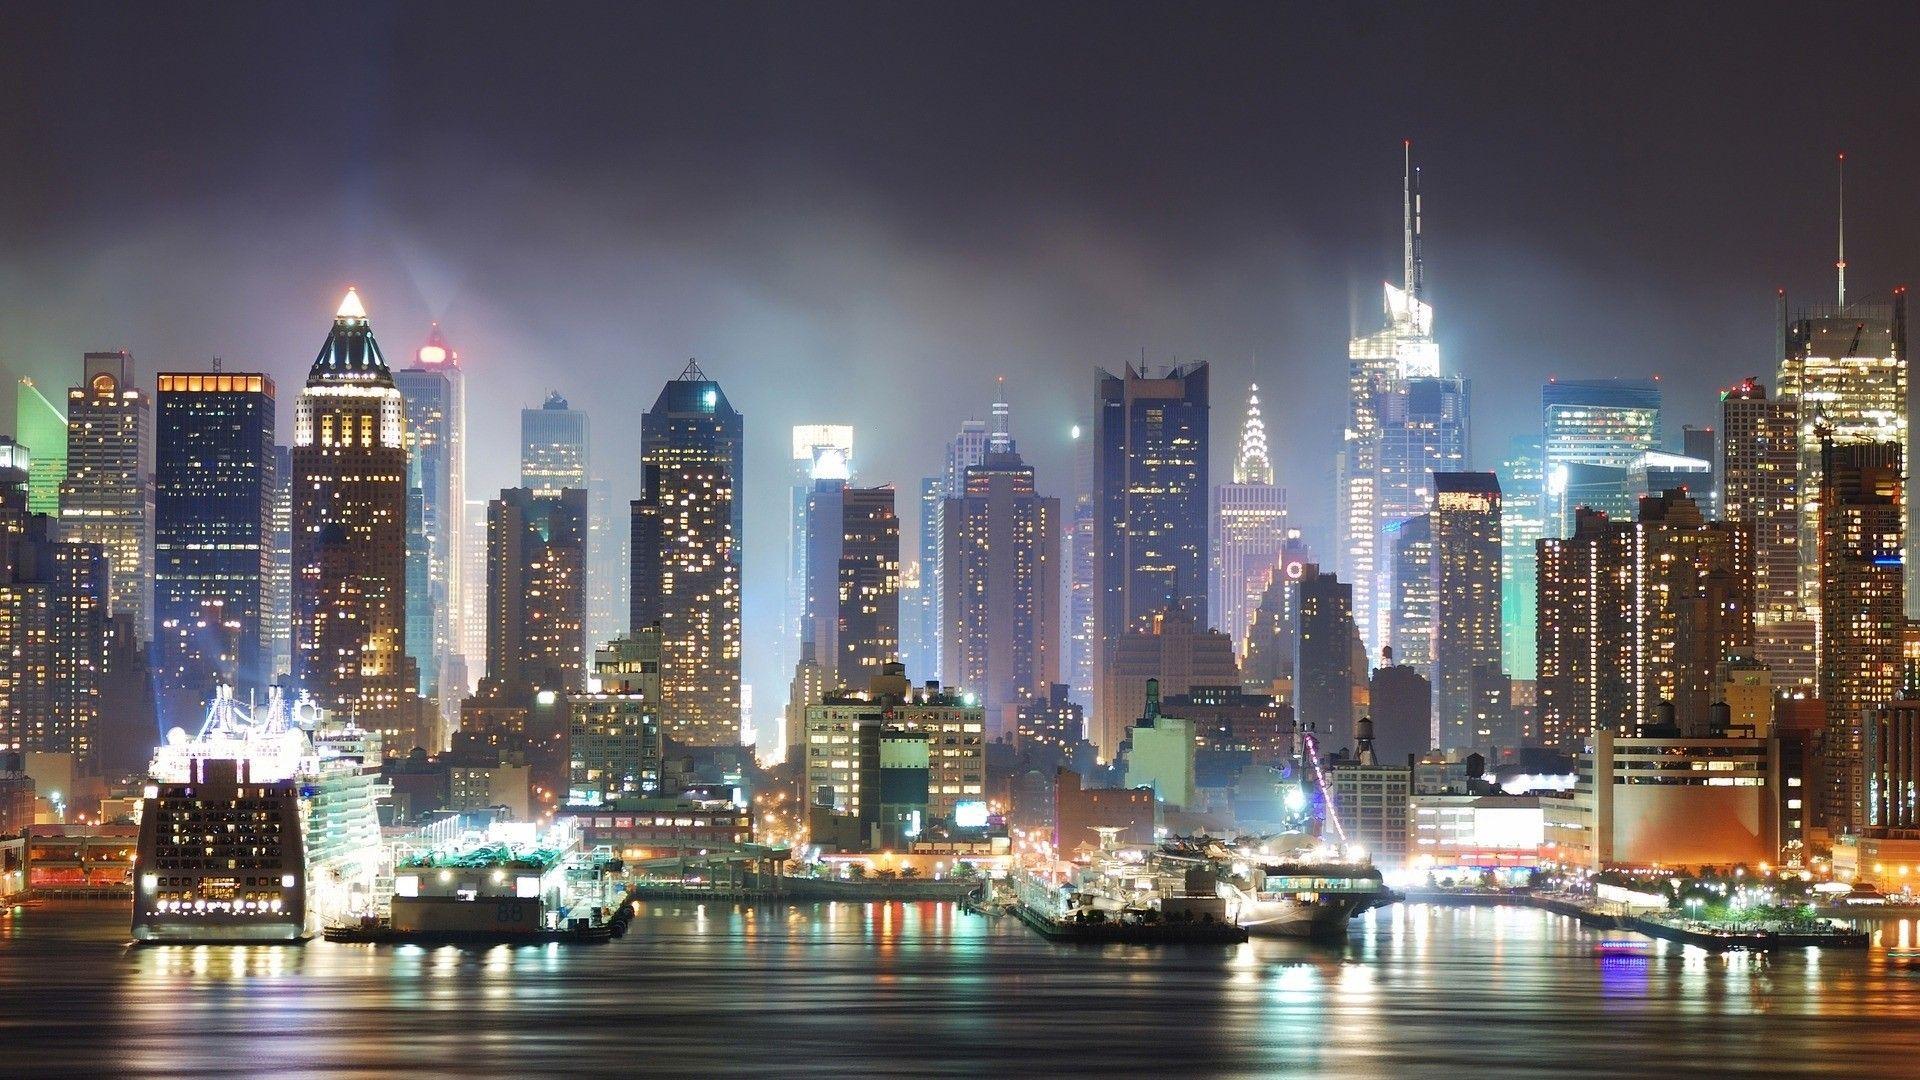 Piers Nyc Foggy Night Landscapes Cityscapes Skyscrapers Art